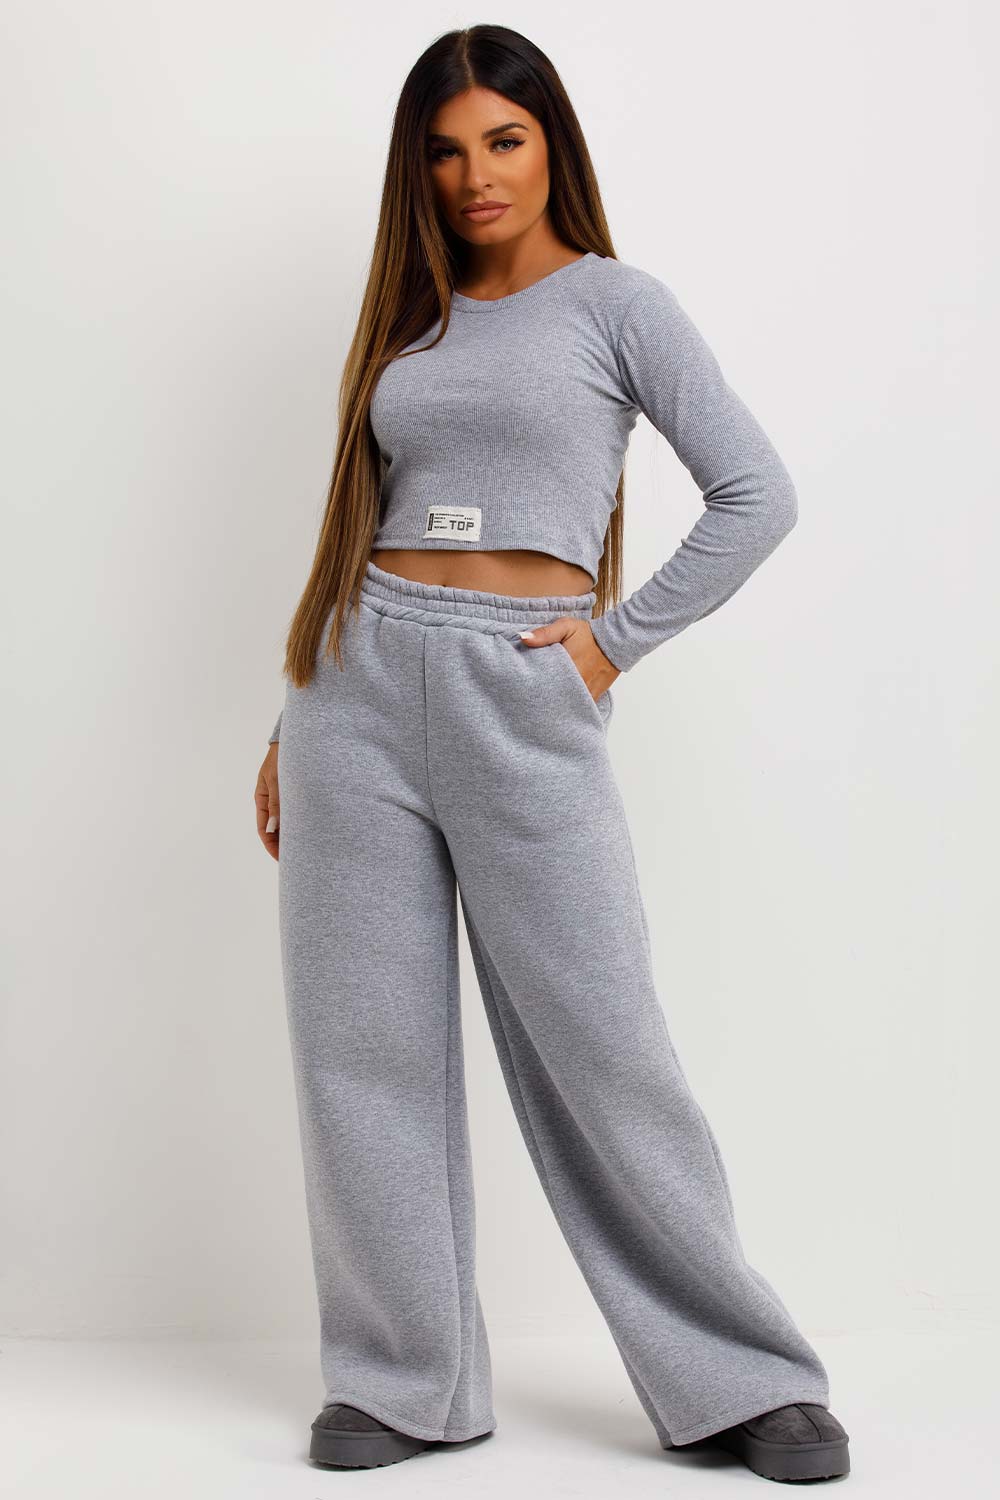 https://styledup.co.uk/cdn/shop/files/ribbed-grey-crop-top-and-wide-leg-joggers-co-ord-styledup-fashion.jpg?v=1698154559